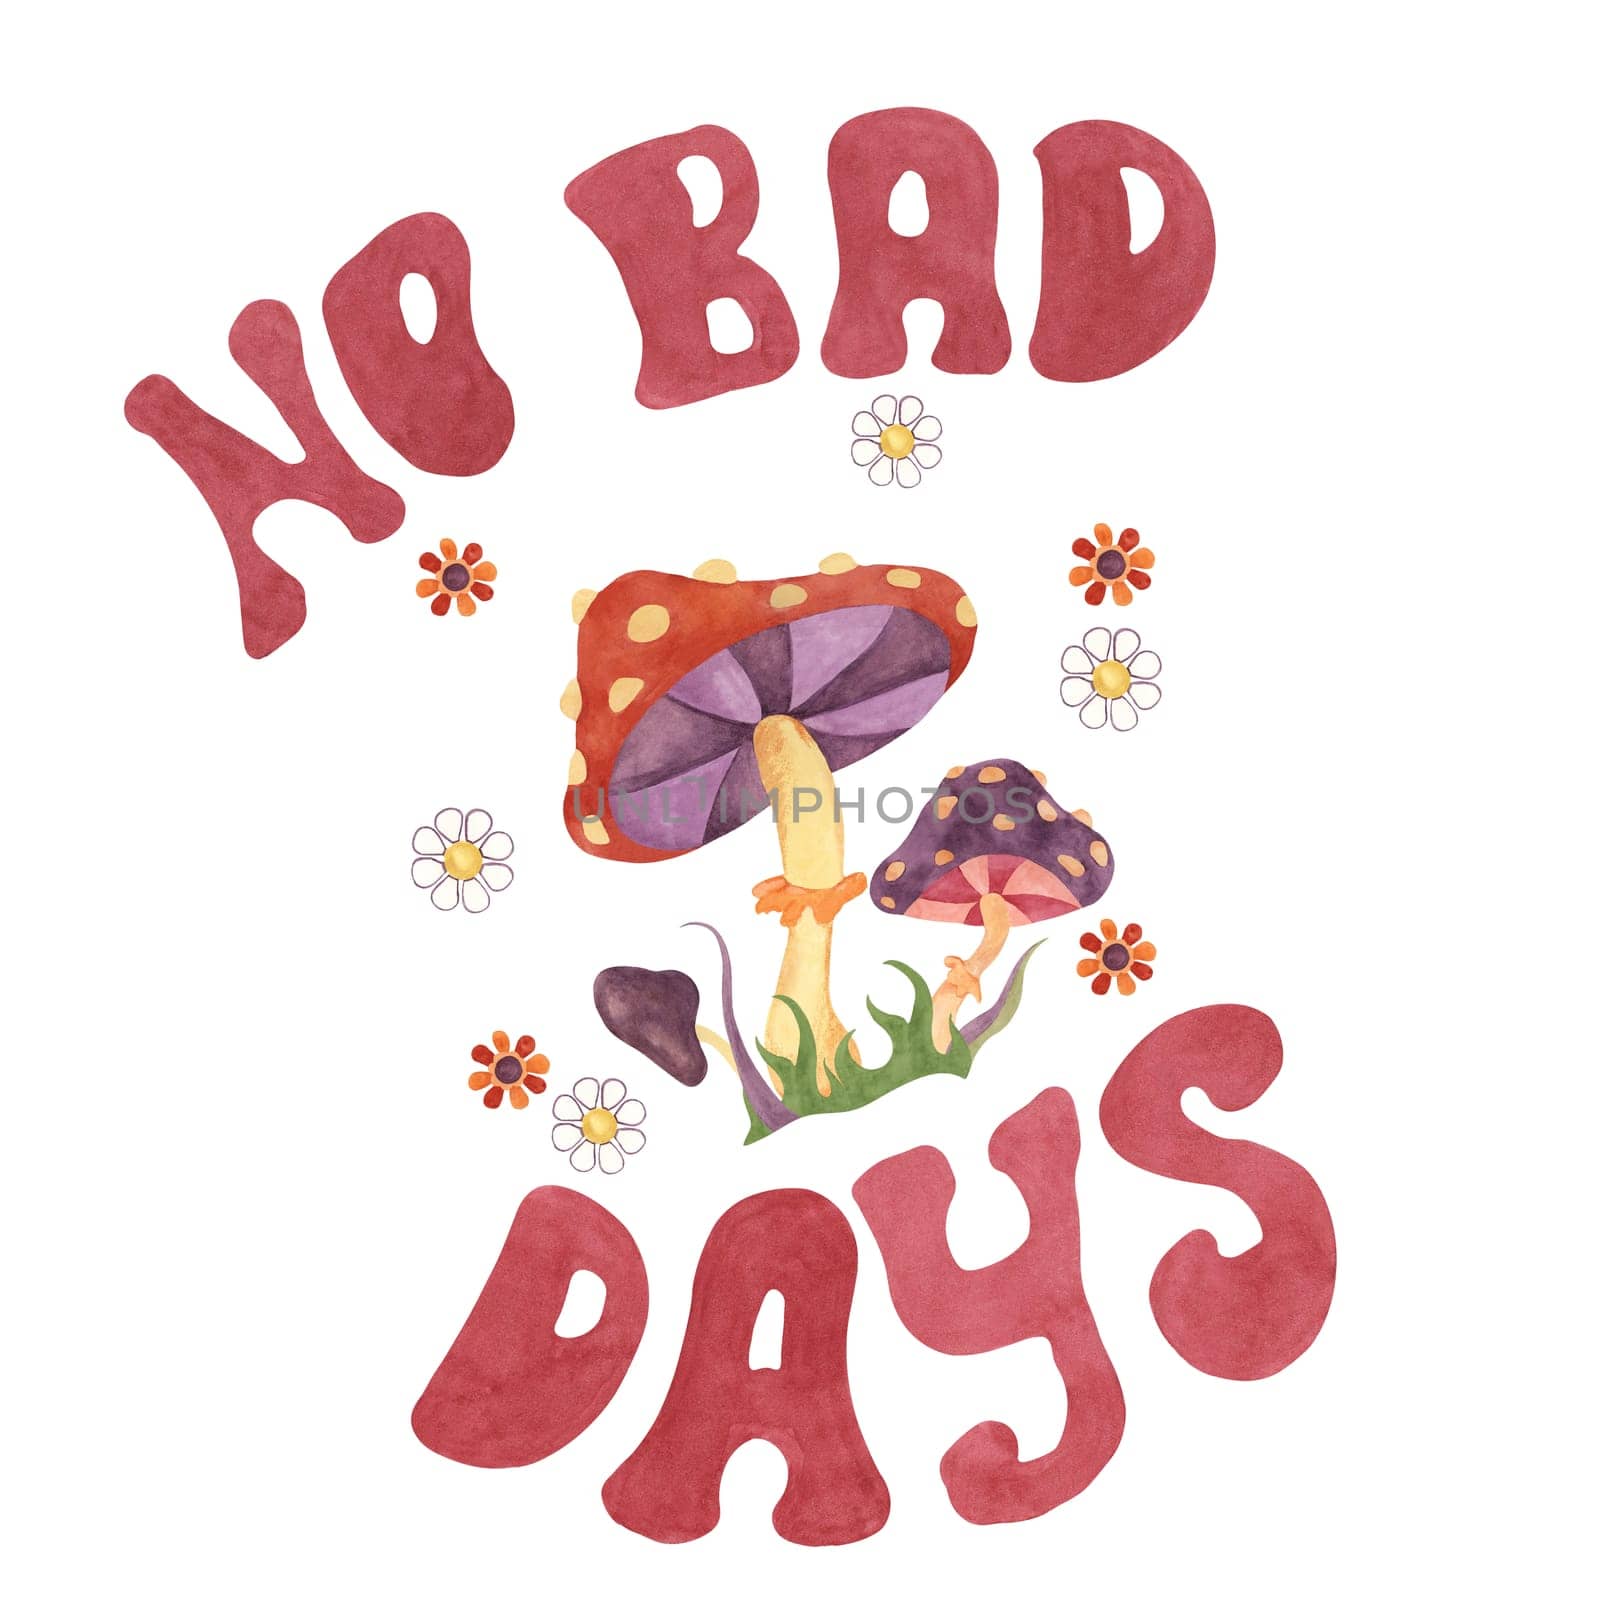 Trippy fly agaric mushrooms, flowers and no bad days slogan print tee. Retro hippie fungus clipart 60s 70s style hand drawn nostalgic graphic t shirt. by Fofito